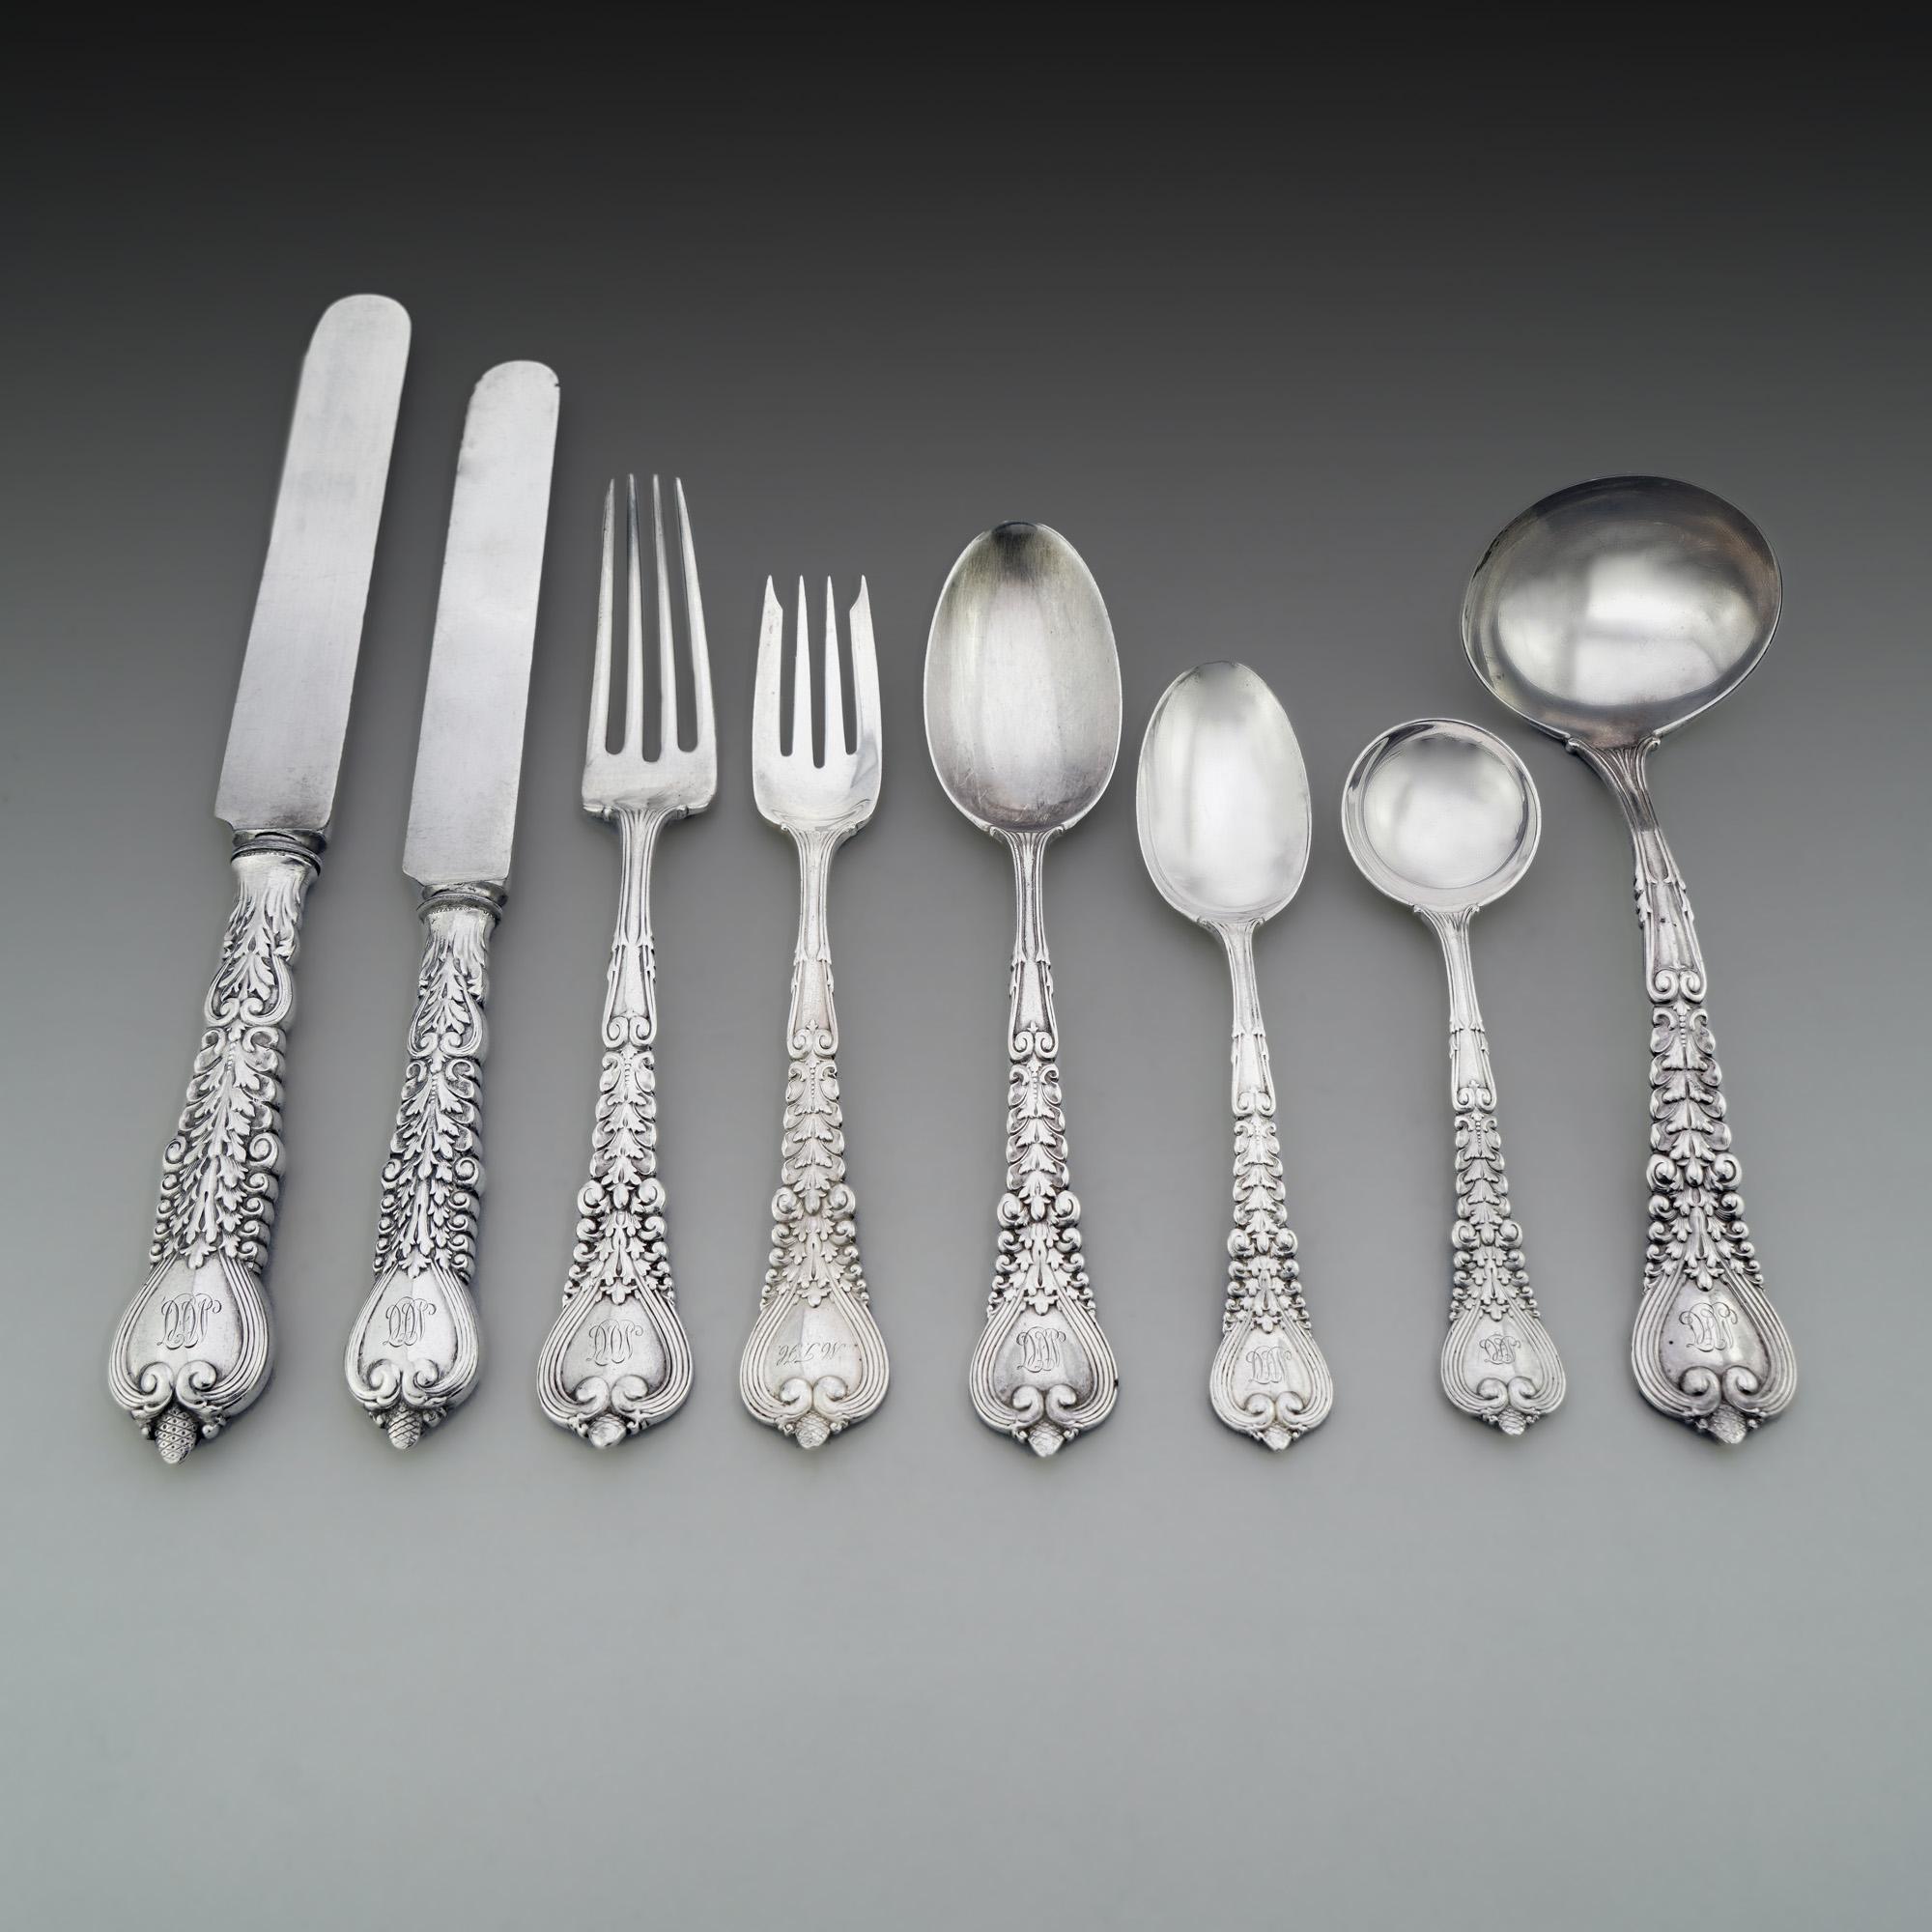 Tiffany & Co sterling silver cutlery set of 8 pieces in a Florentine pattern
The cutlery set has initials.

With this Tiffany & Co silverware set, you will have the perfect entertaining kit for your holiday gatherings. The set is perfect for those